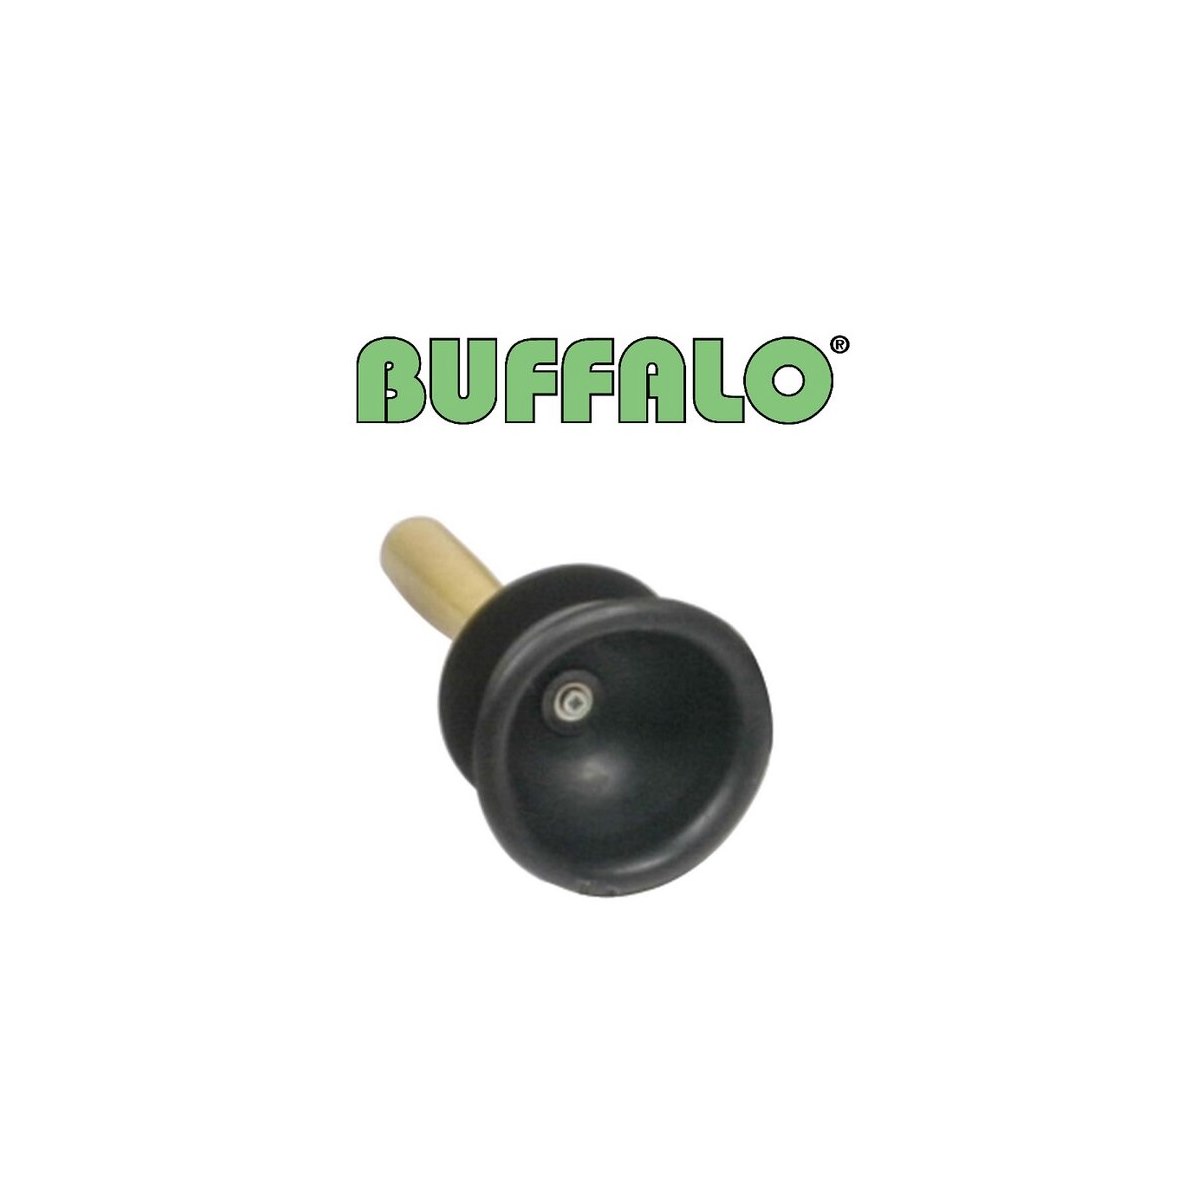 Buffalo Small Sink and Basin Plunger